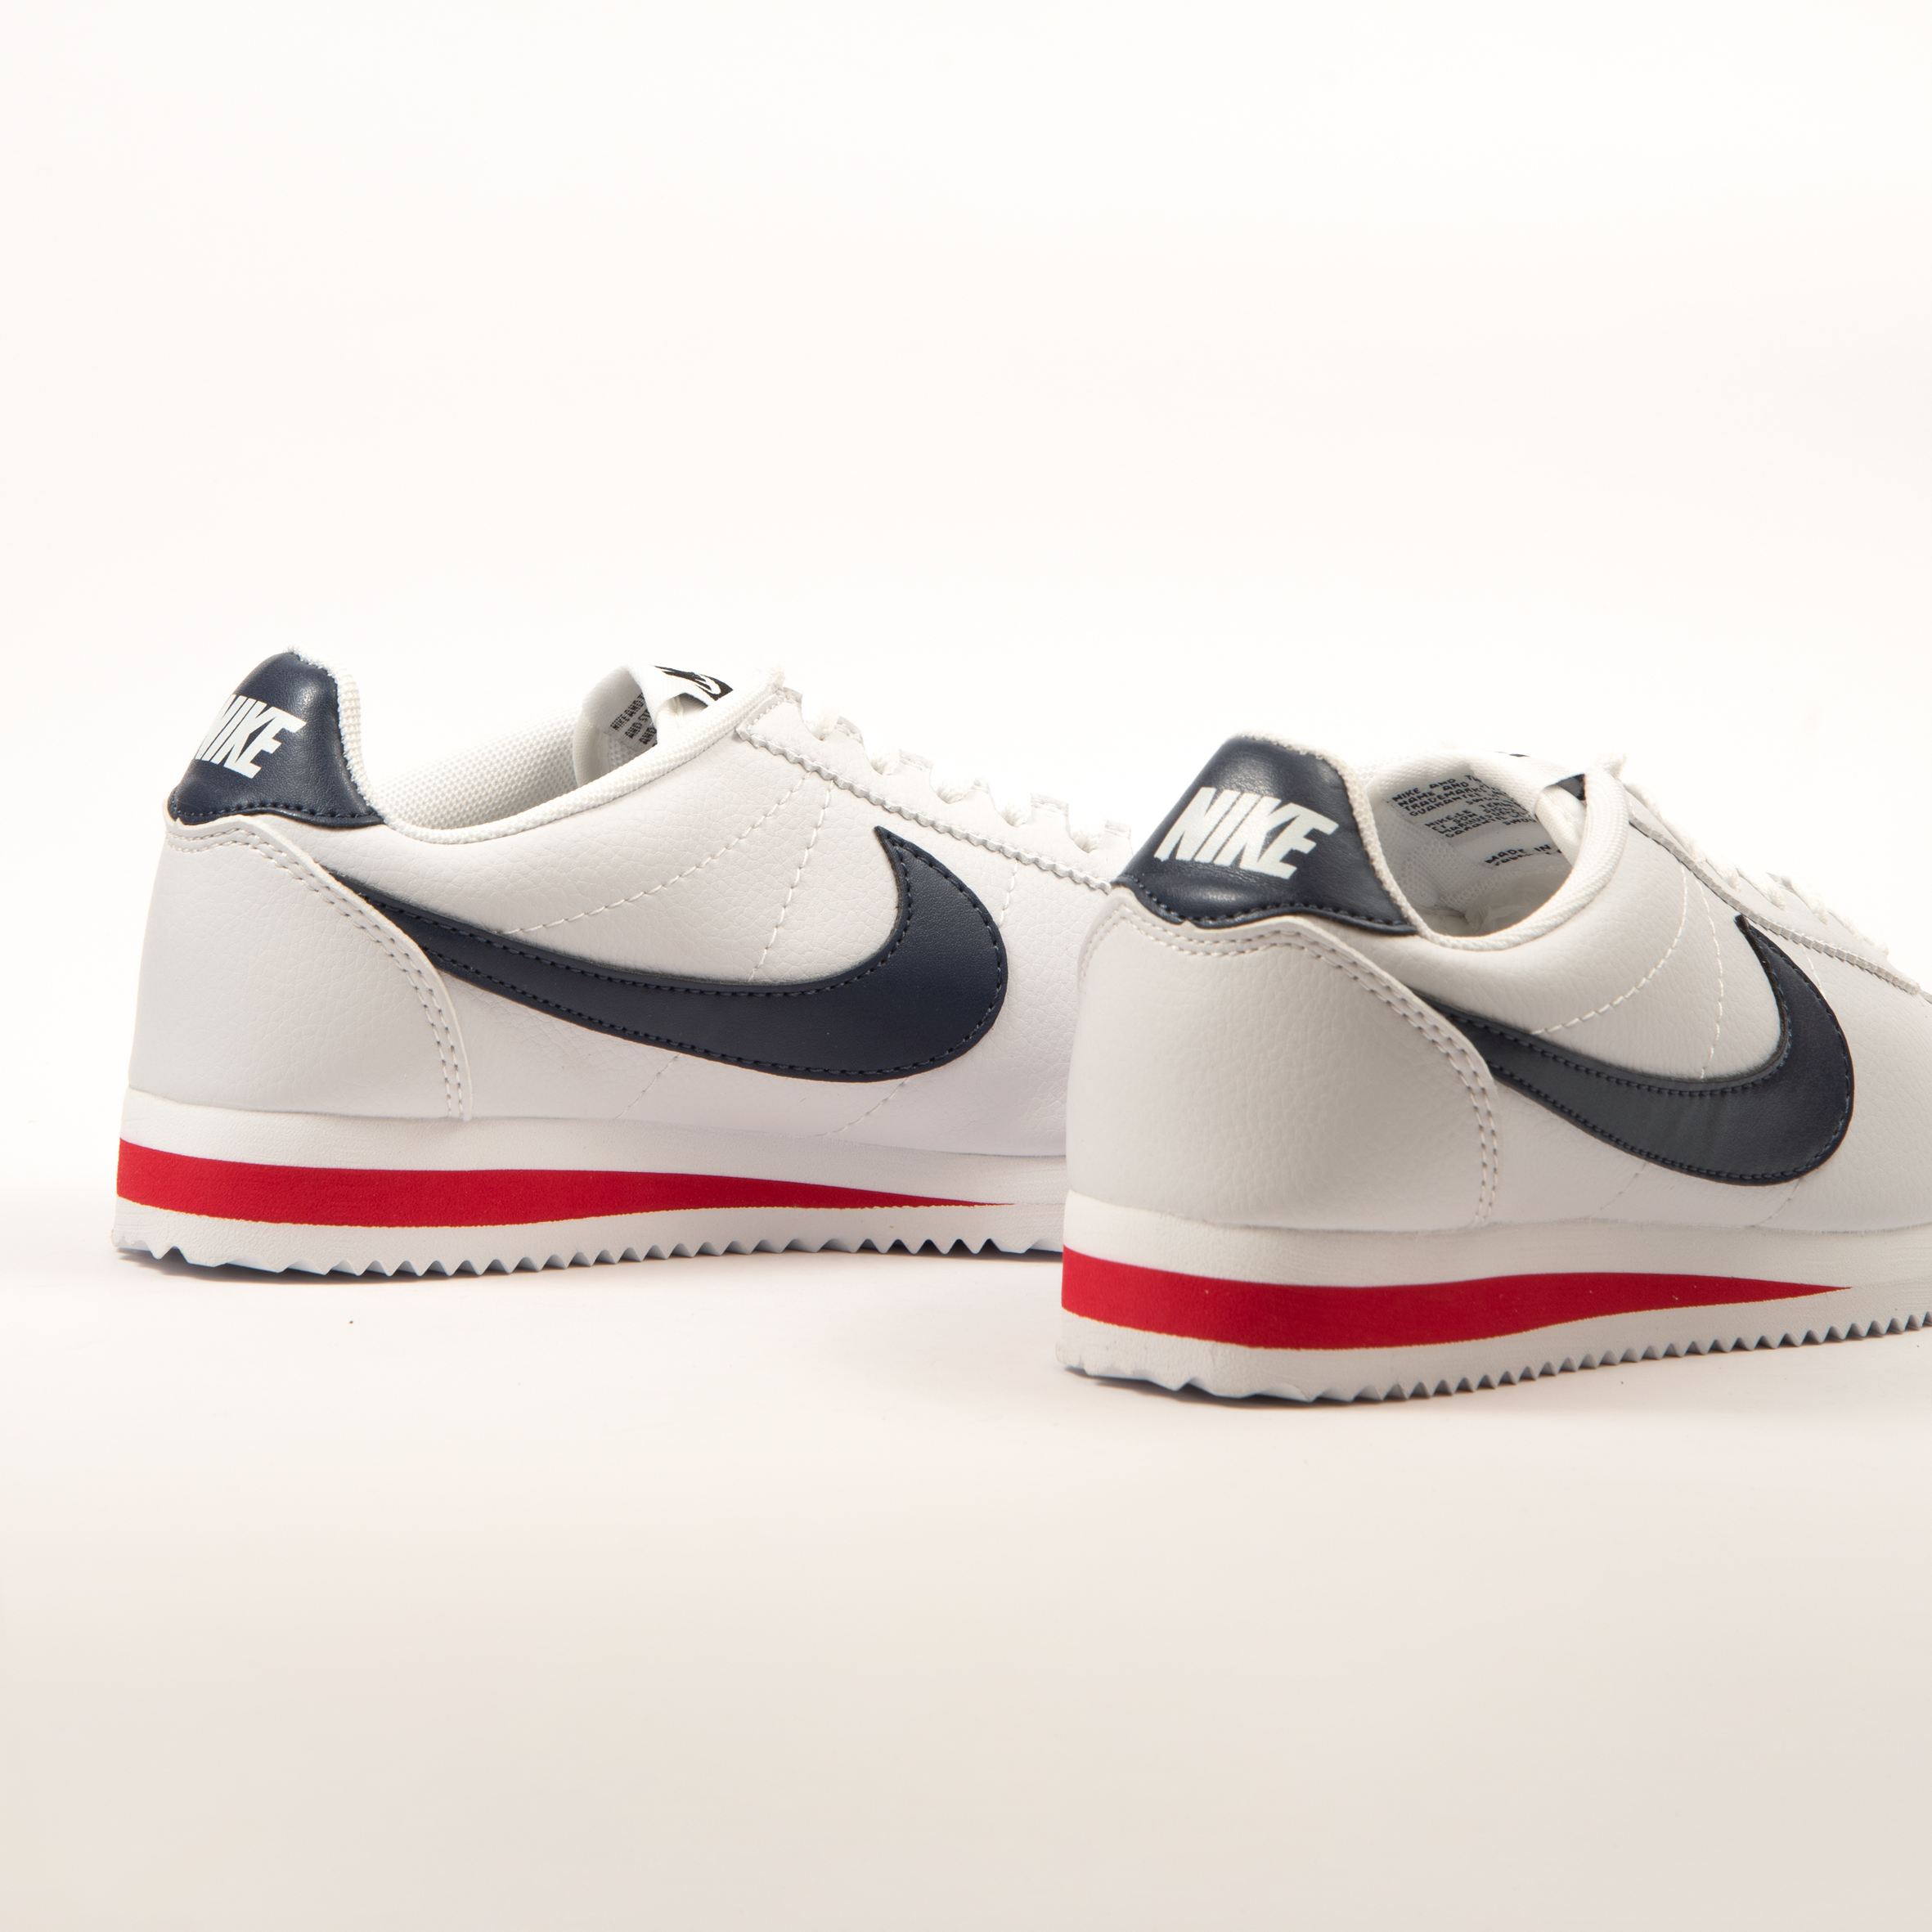 NIKE CLASSIC CORTEZ LEATHER - Mark and Shark